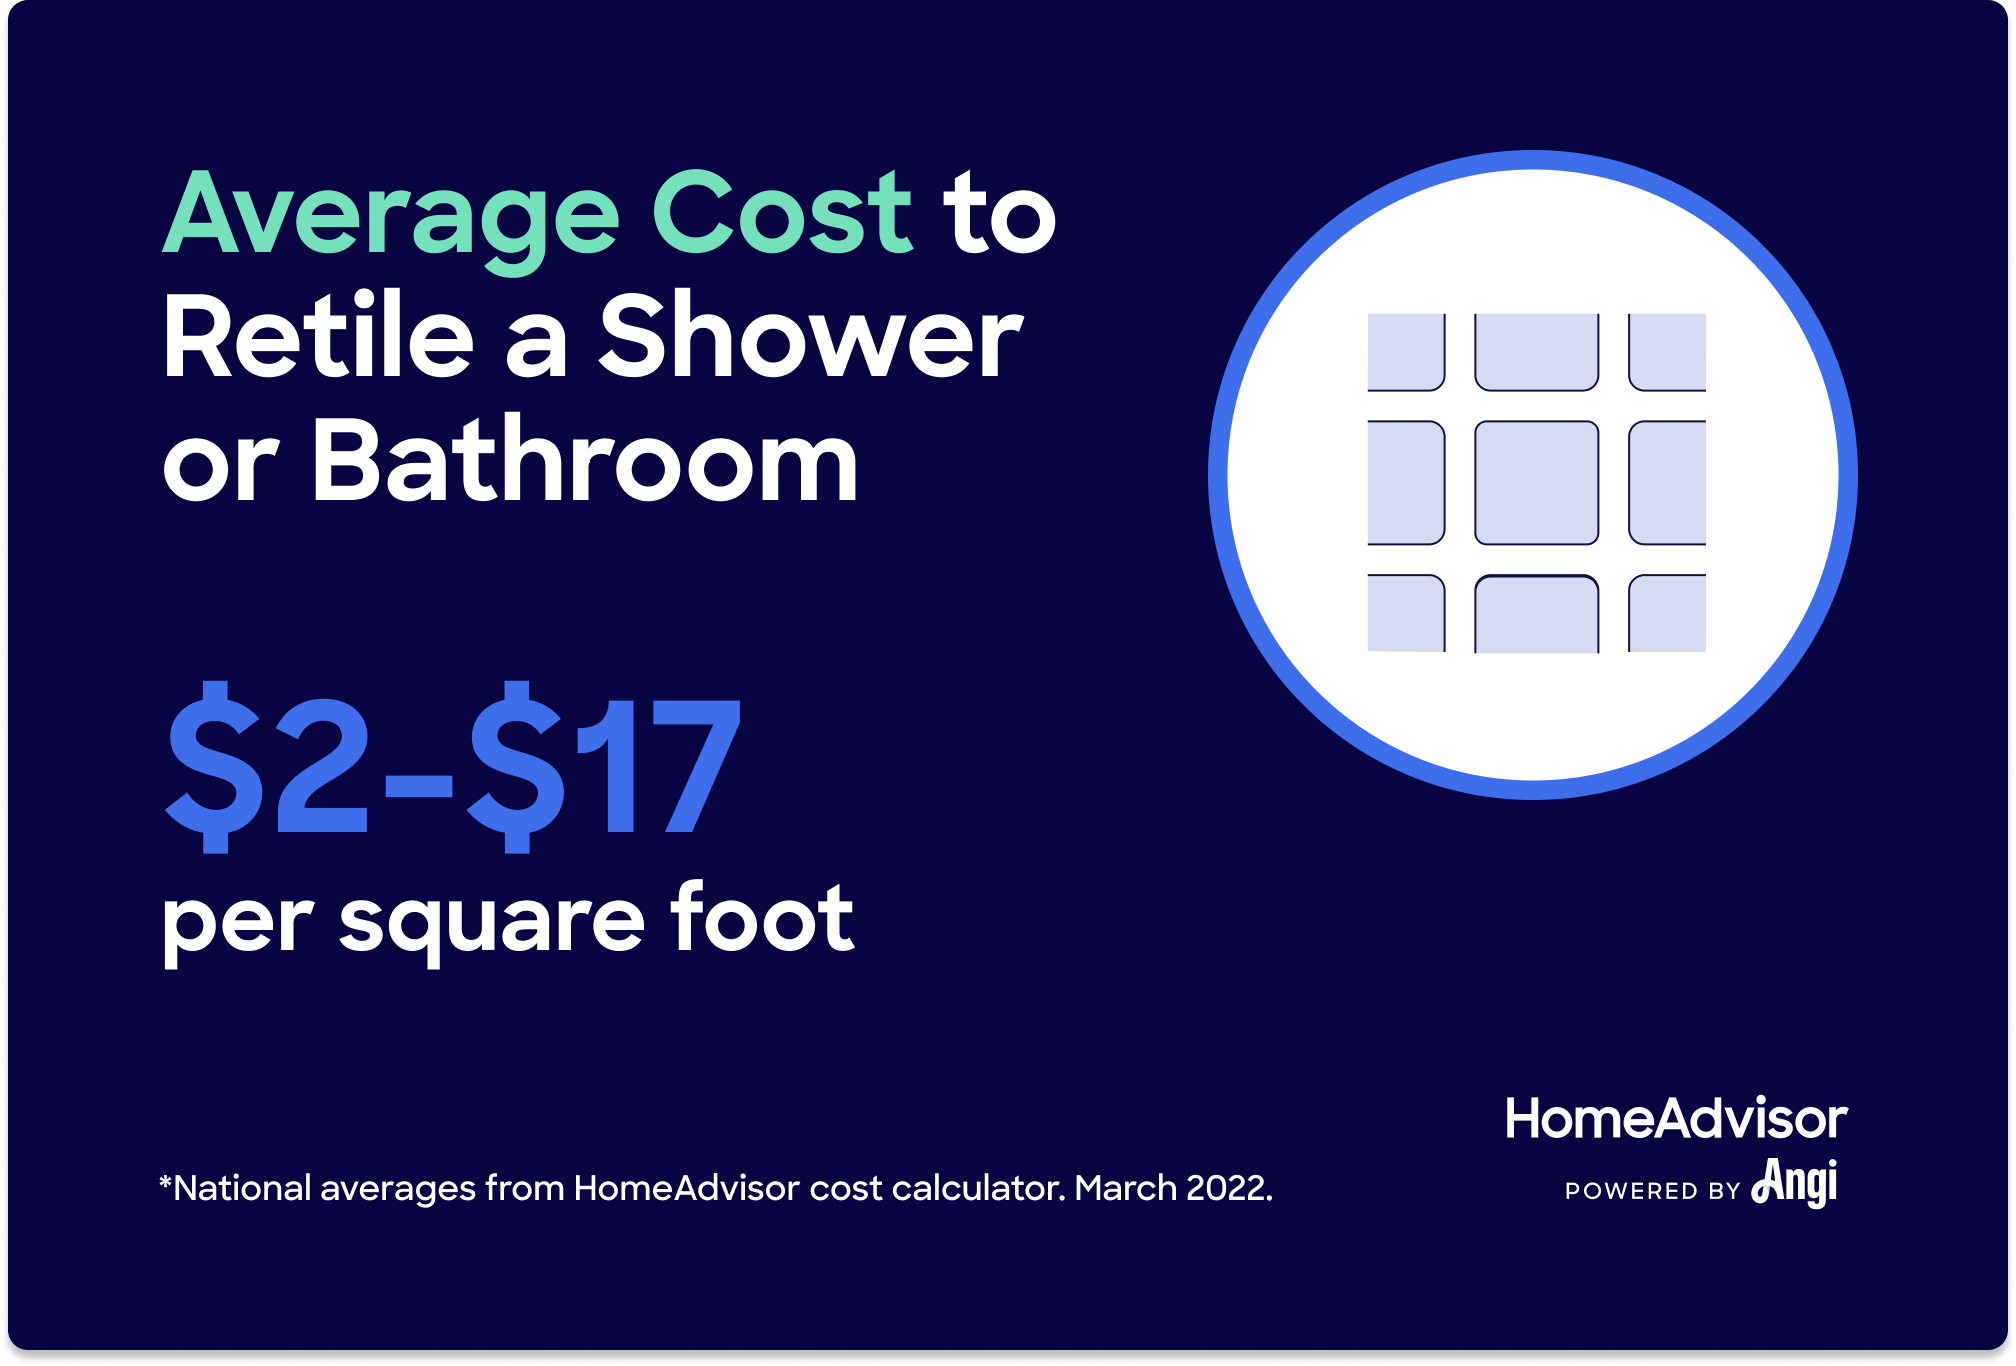 The average cost to retile a shower or bathroom is $2–$17 per square foot .